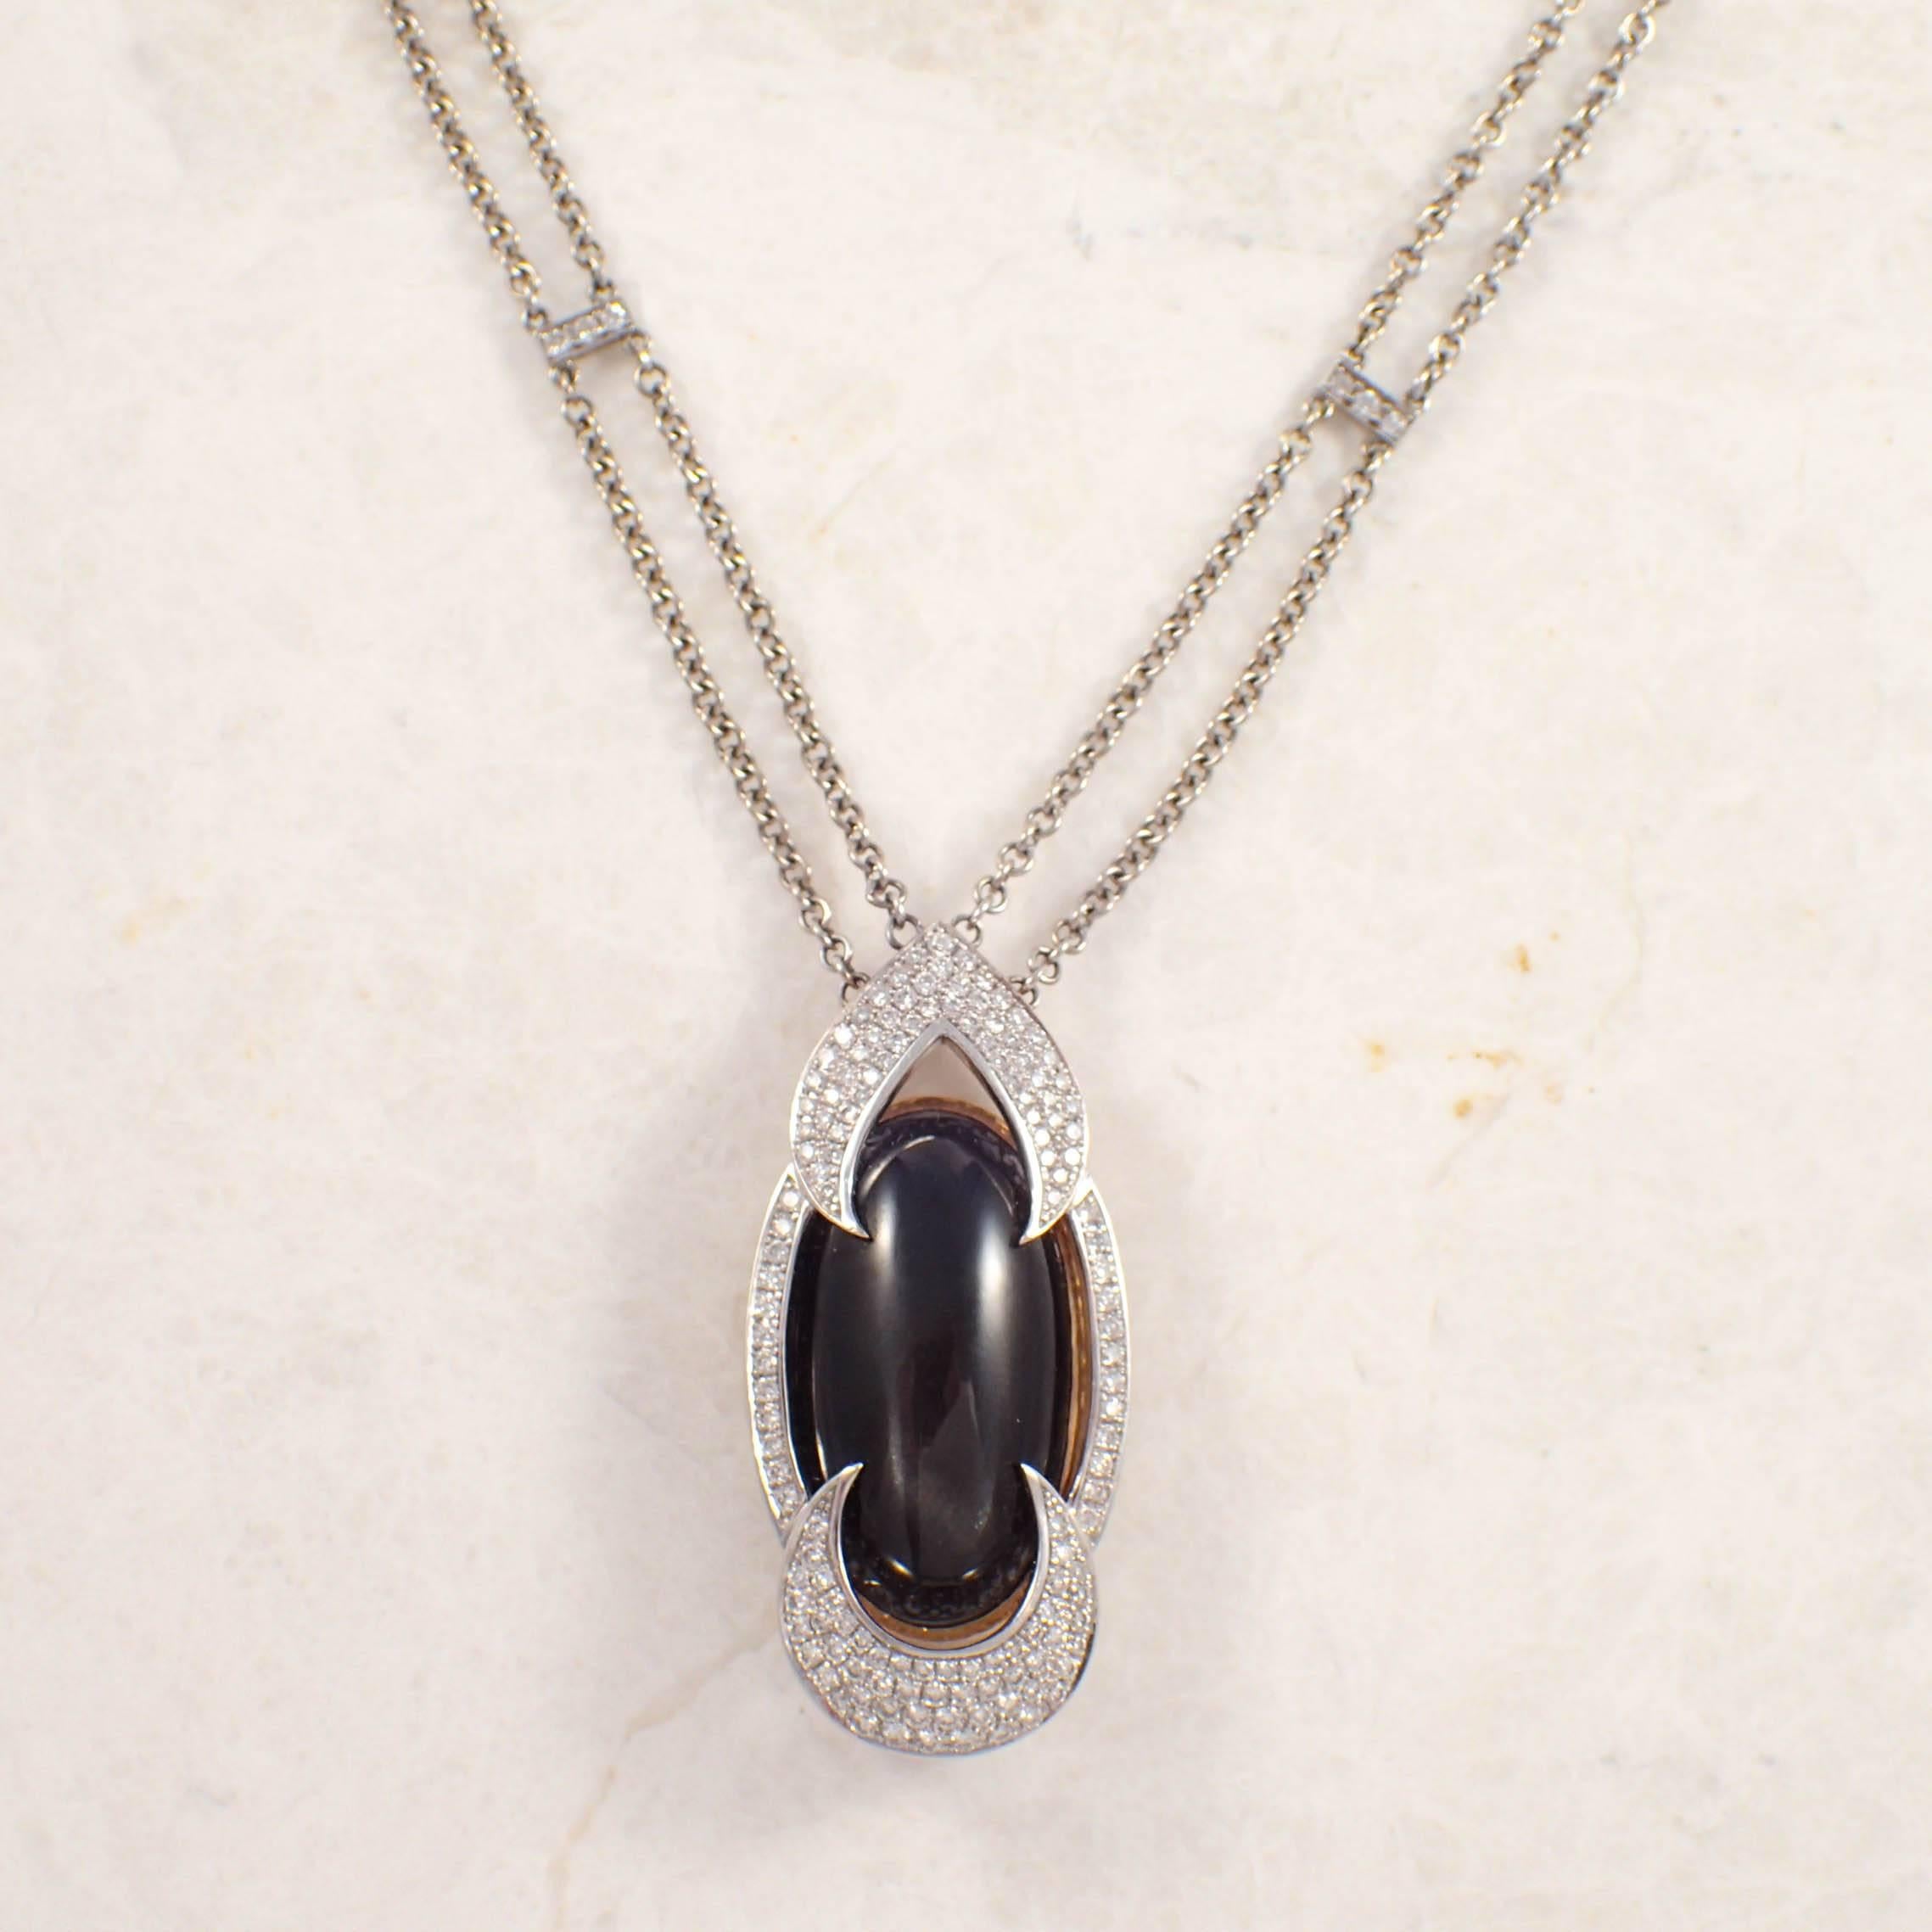 18k white gold black star sapphire and diamond necklace.  The custom necklace set with one black star sapphire weighing approximately 20.00 carats, and pave set with small round diamonds weighing approximately 1.50 carats total.
Circa